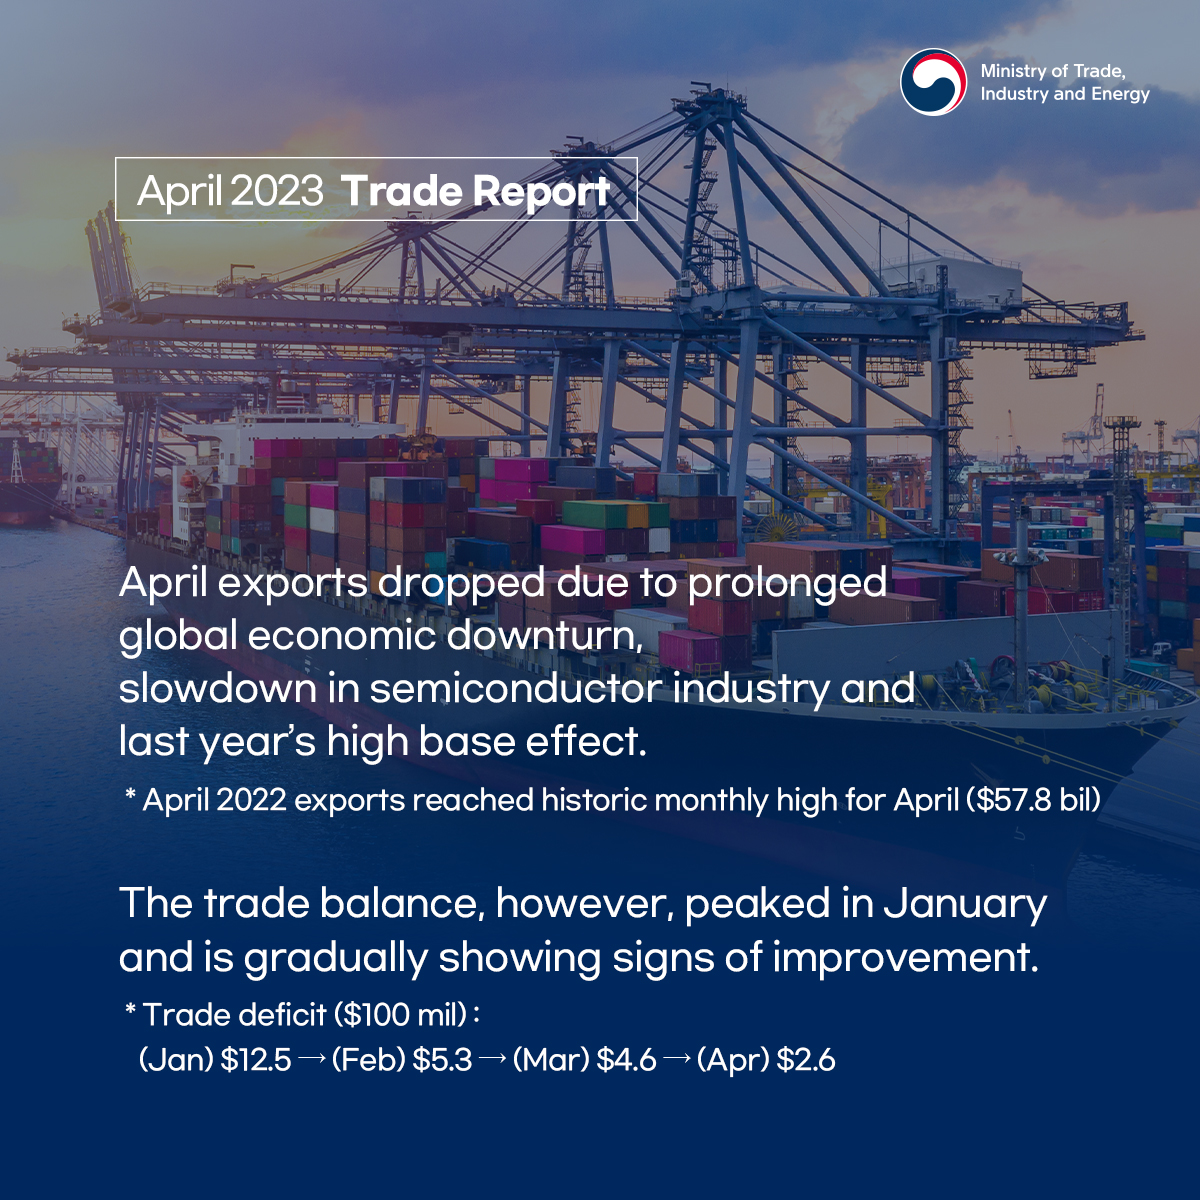 Korea's exports decline 14.2% in April, trade balance shows recovery Image 1